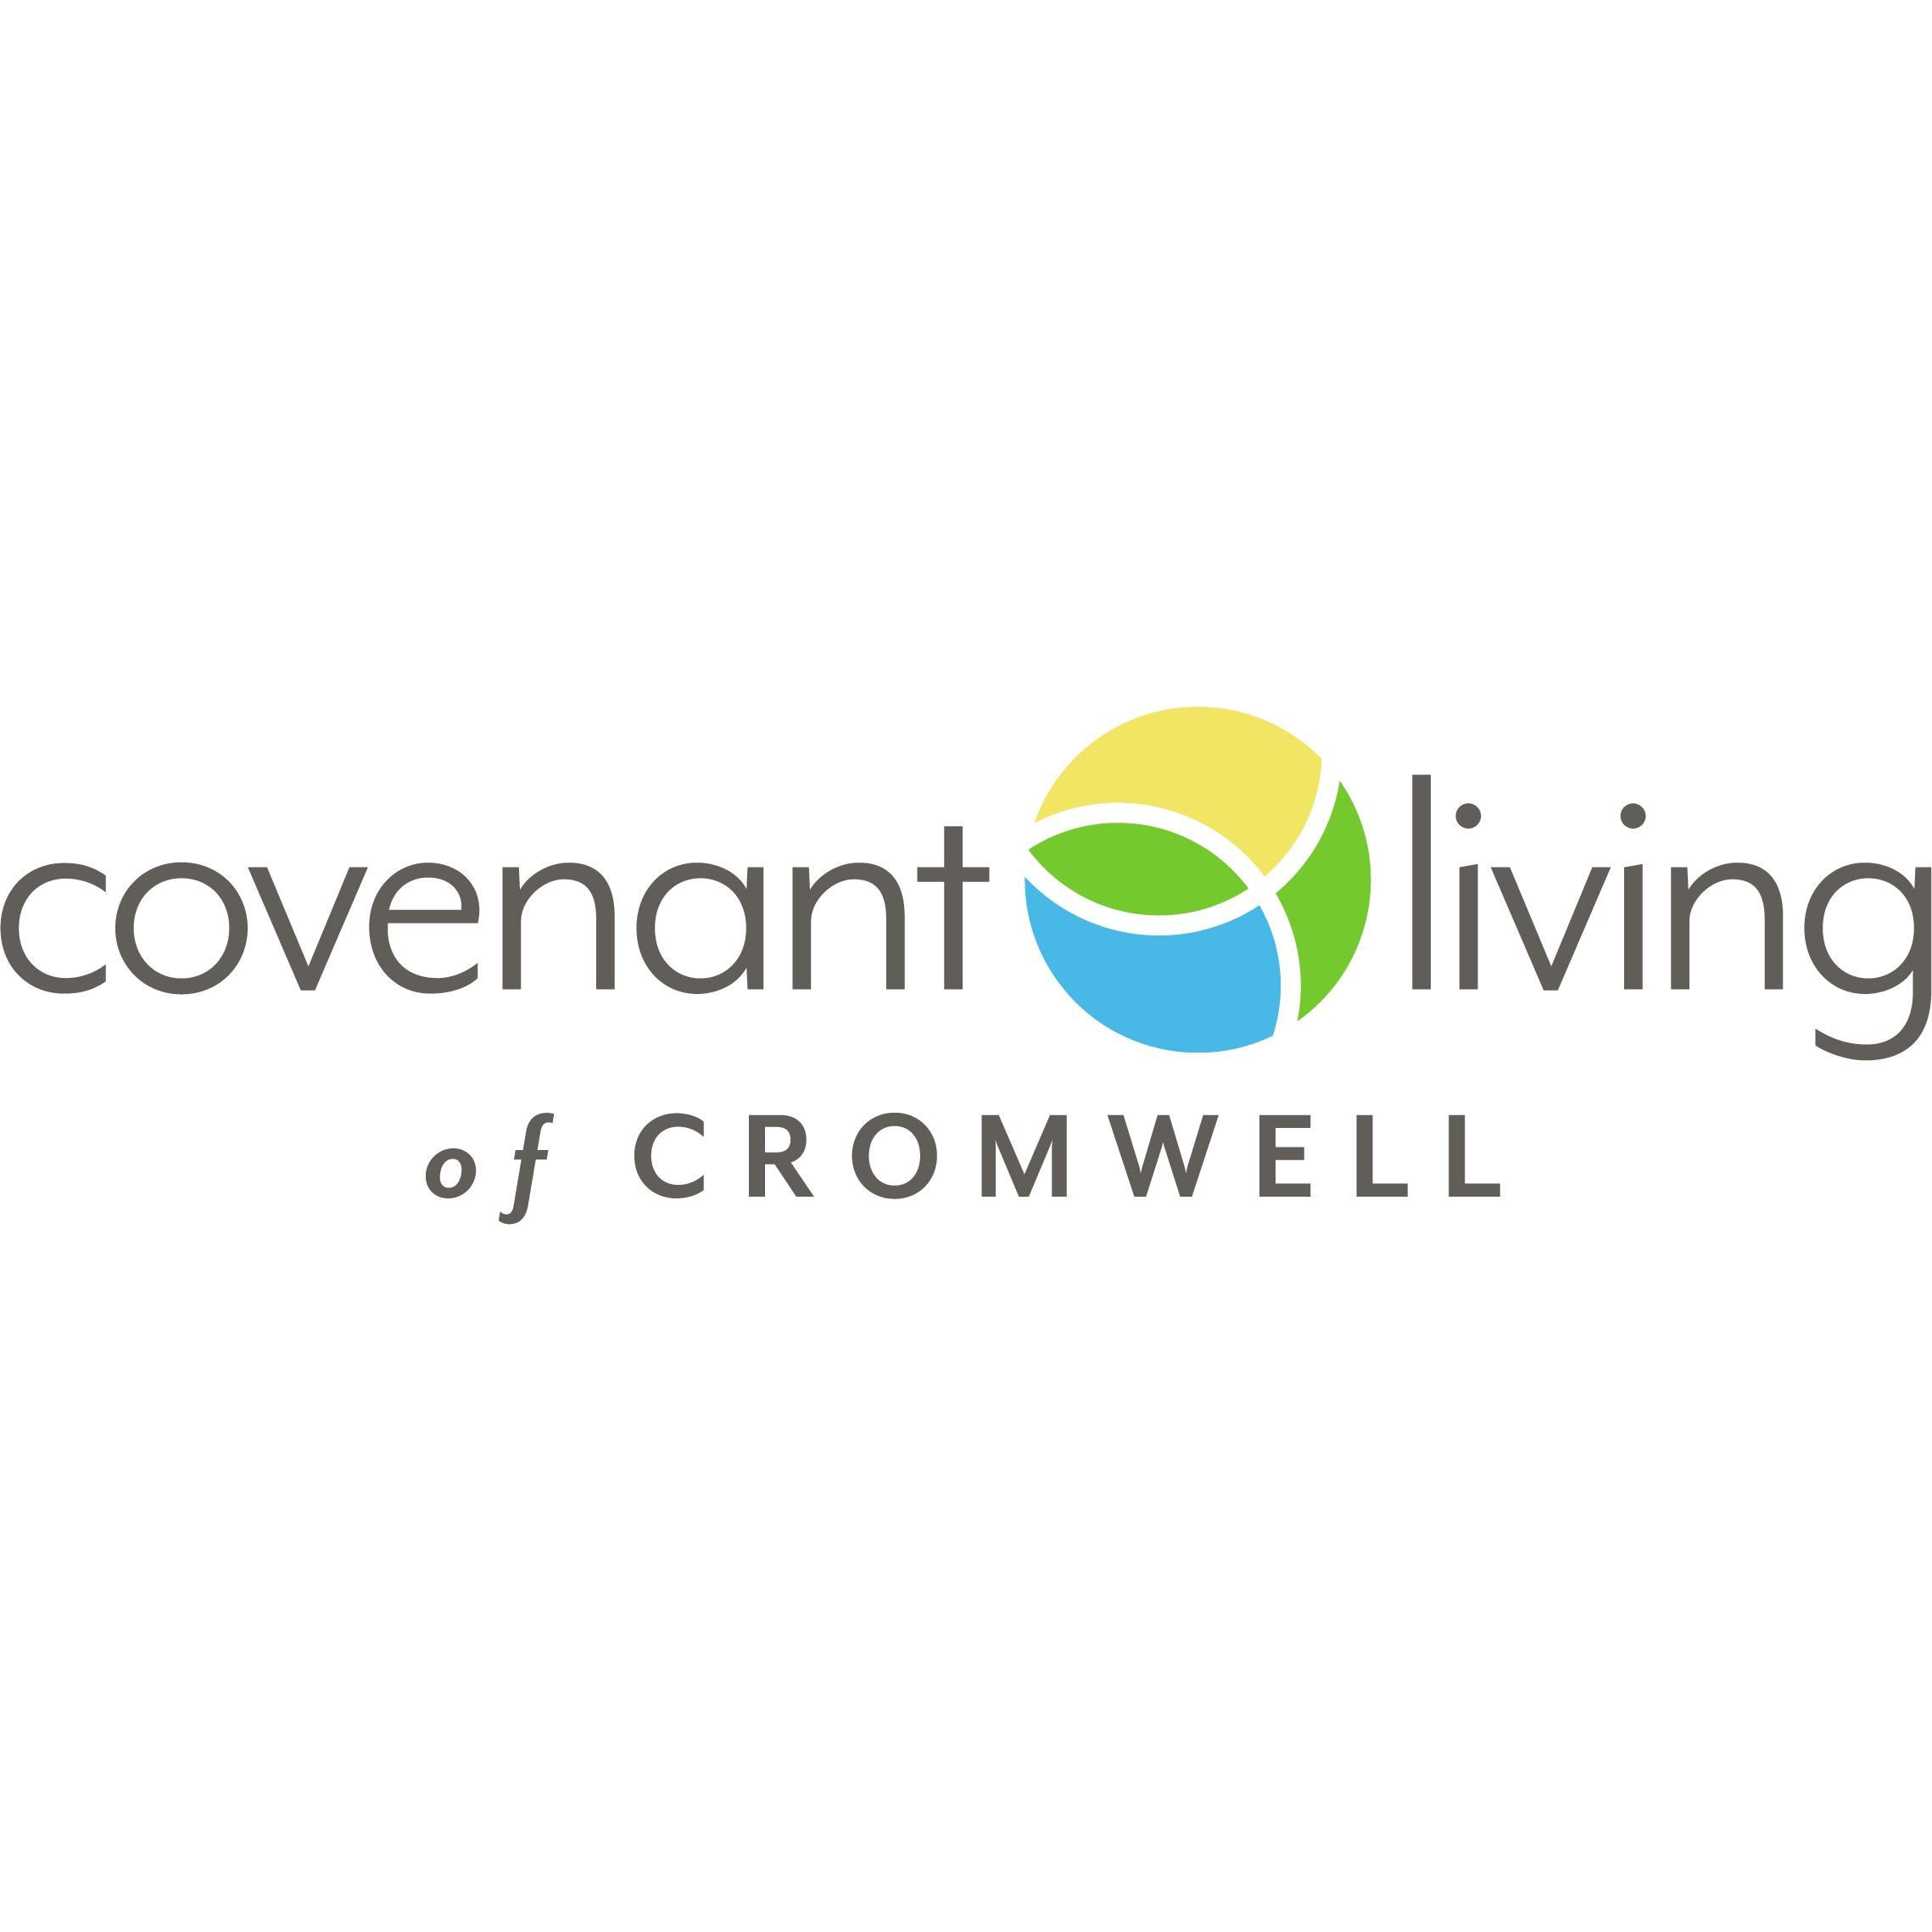 Covenant Living of Cromwell